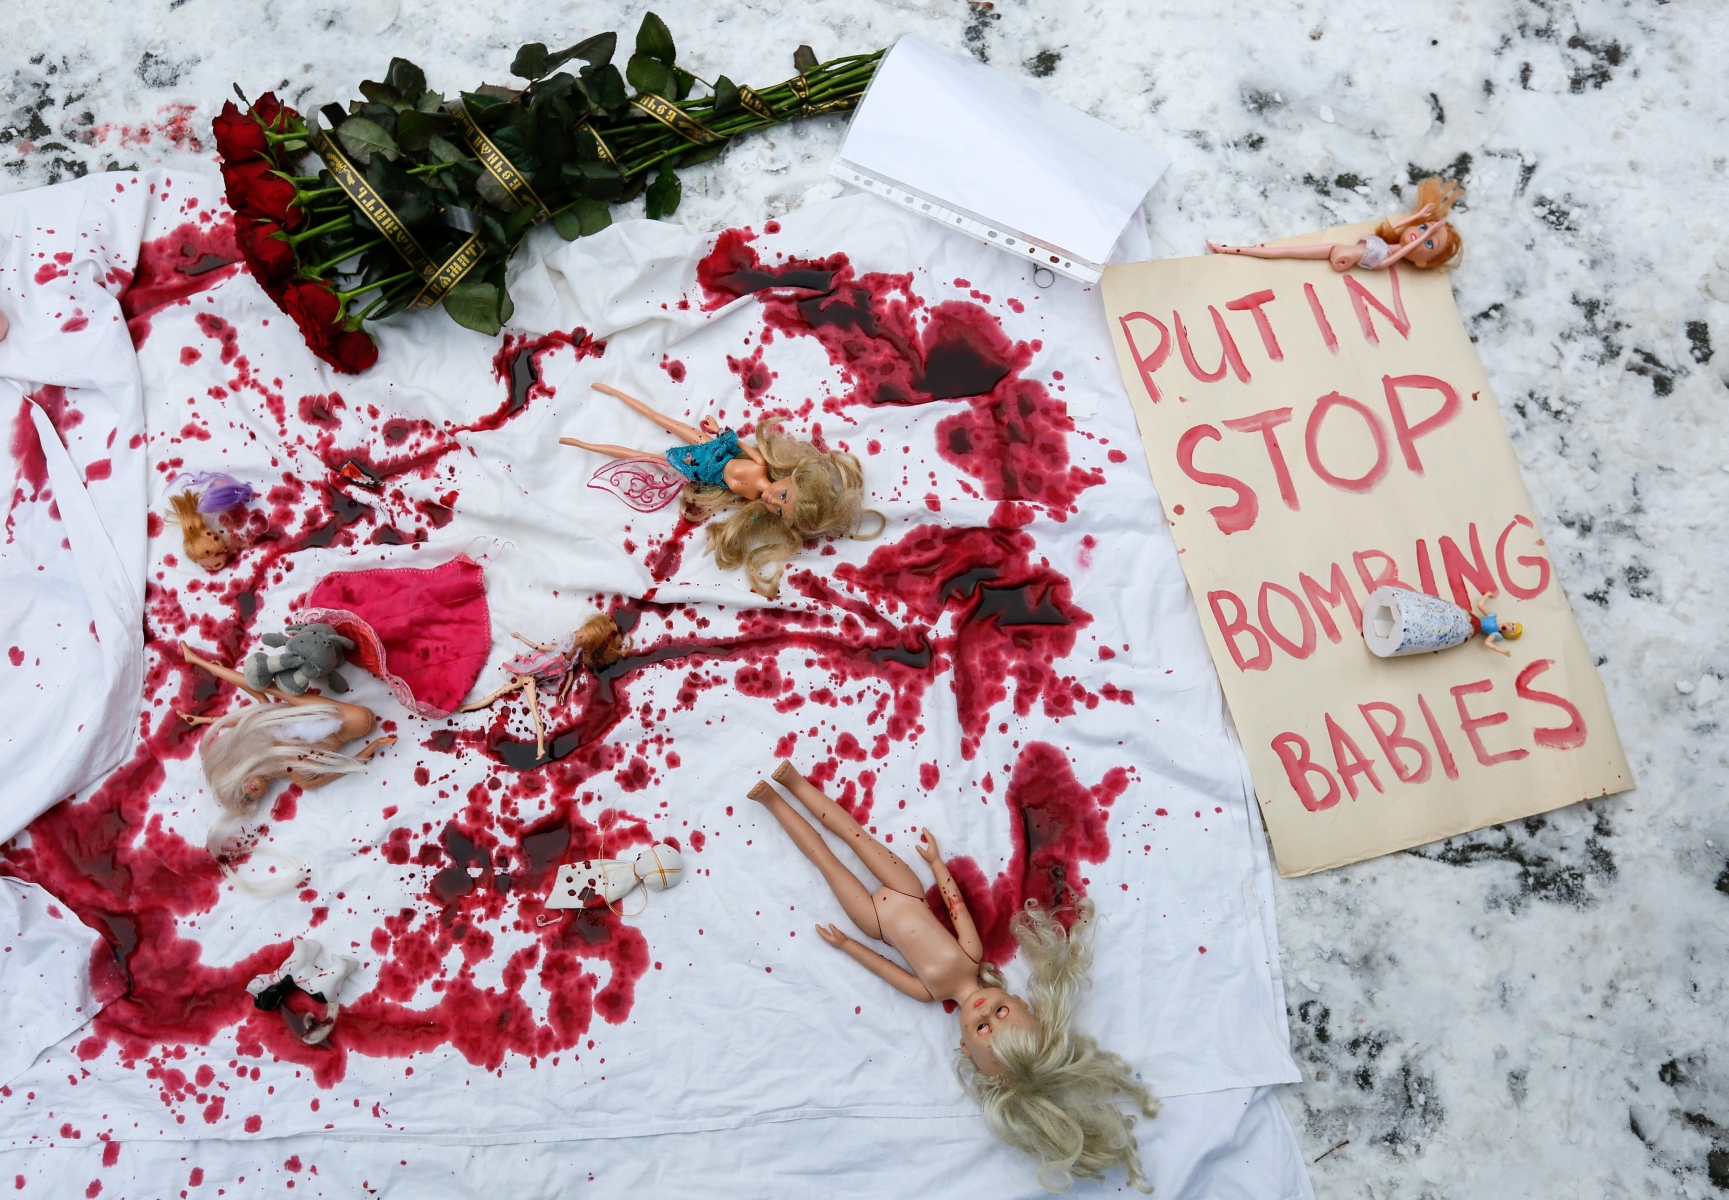 epa05676444 A banner with the text 'Putin stop bombing babies' is placed on the ground next to dolls and flowers during a demonstration of activists calling to stop the bombing of Aleppo in Syria, in front of the Russian embassy in Kiev, Ukraine, 15 December 2016. Activists gathered to show solidarity with trapped citizens of Aleppo in Syria and to demand to stop the bombing of Aleppo in Syria.  EPA/ROMAN PILIPEY UKRAINE PROTEST SYRIA ALEPPO